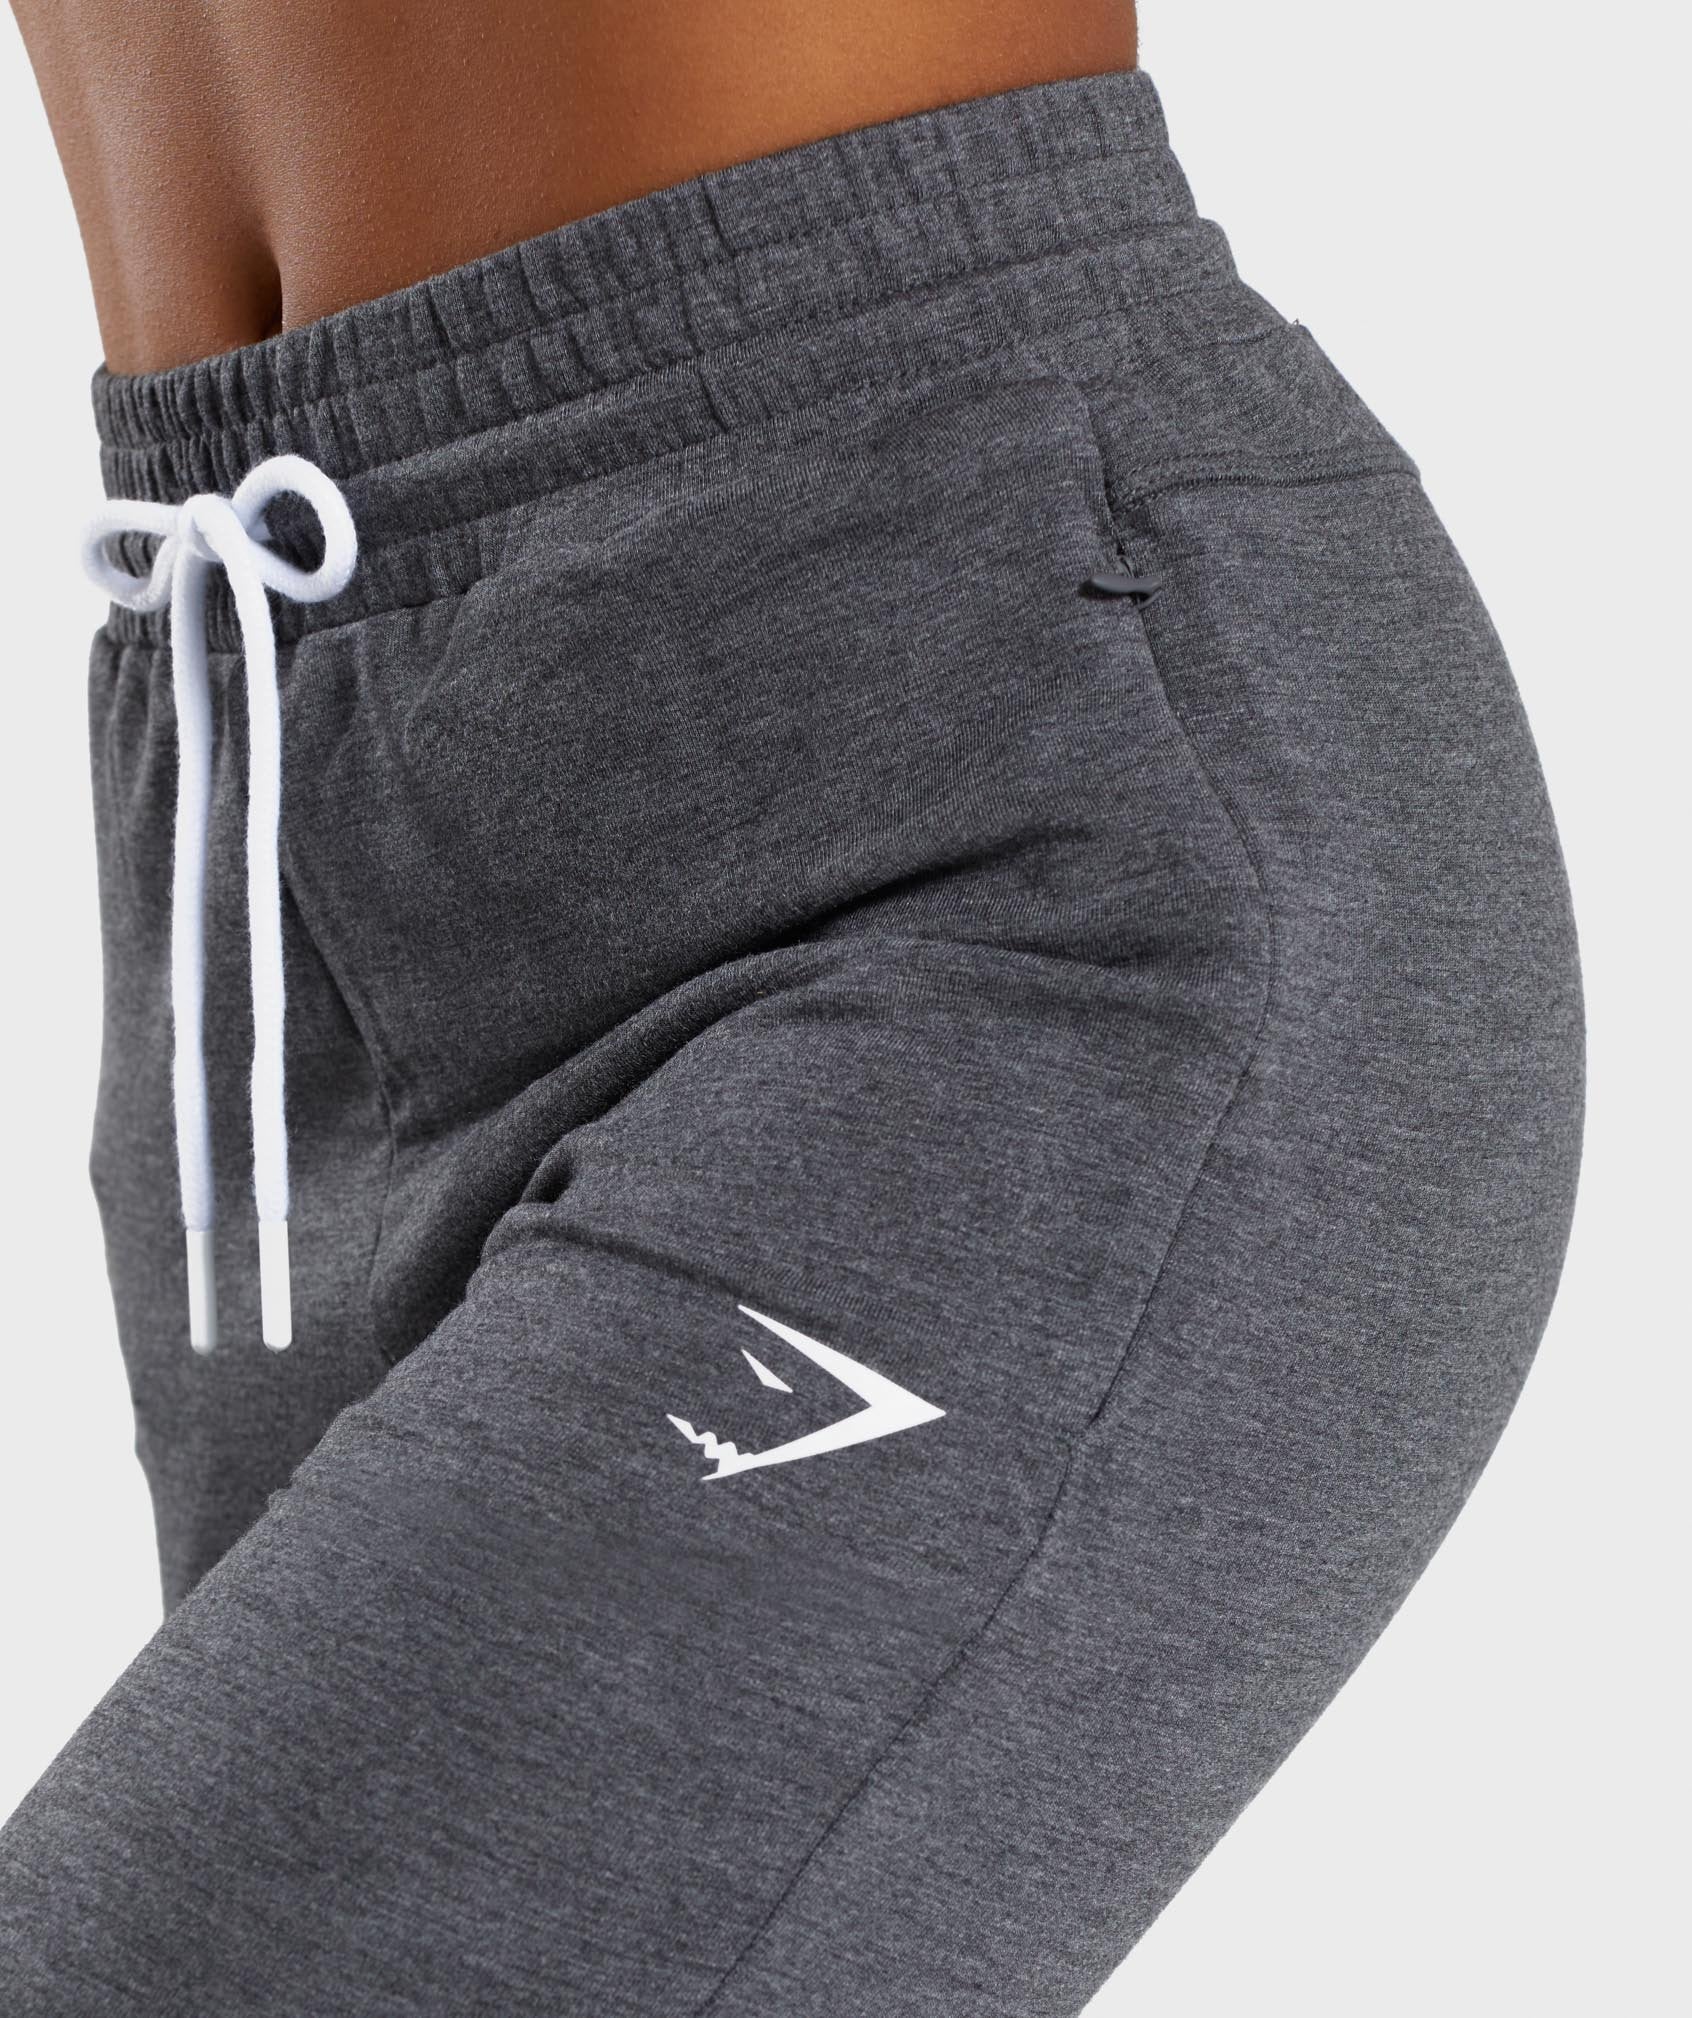 Solace Bottoms in Charcoal Marl - view 6